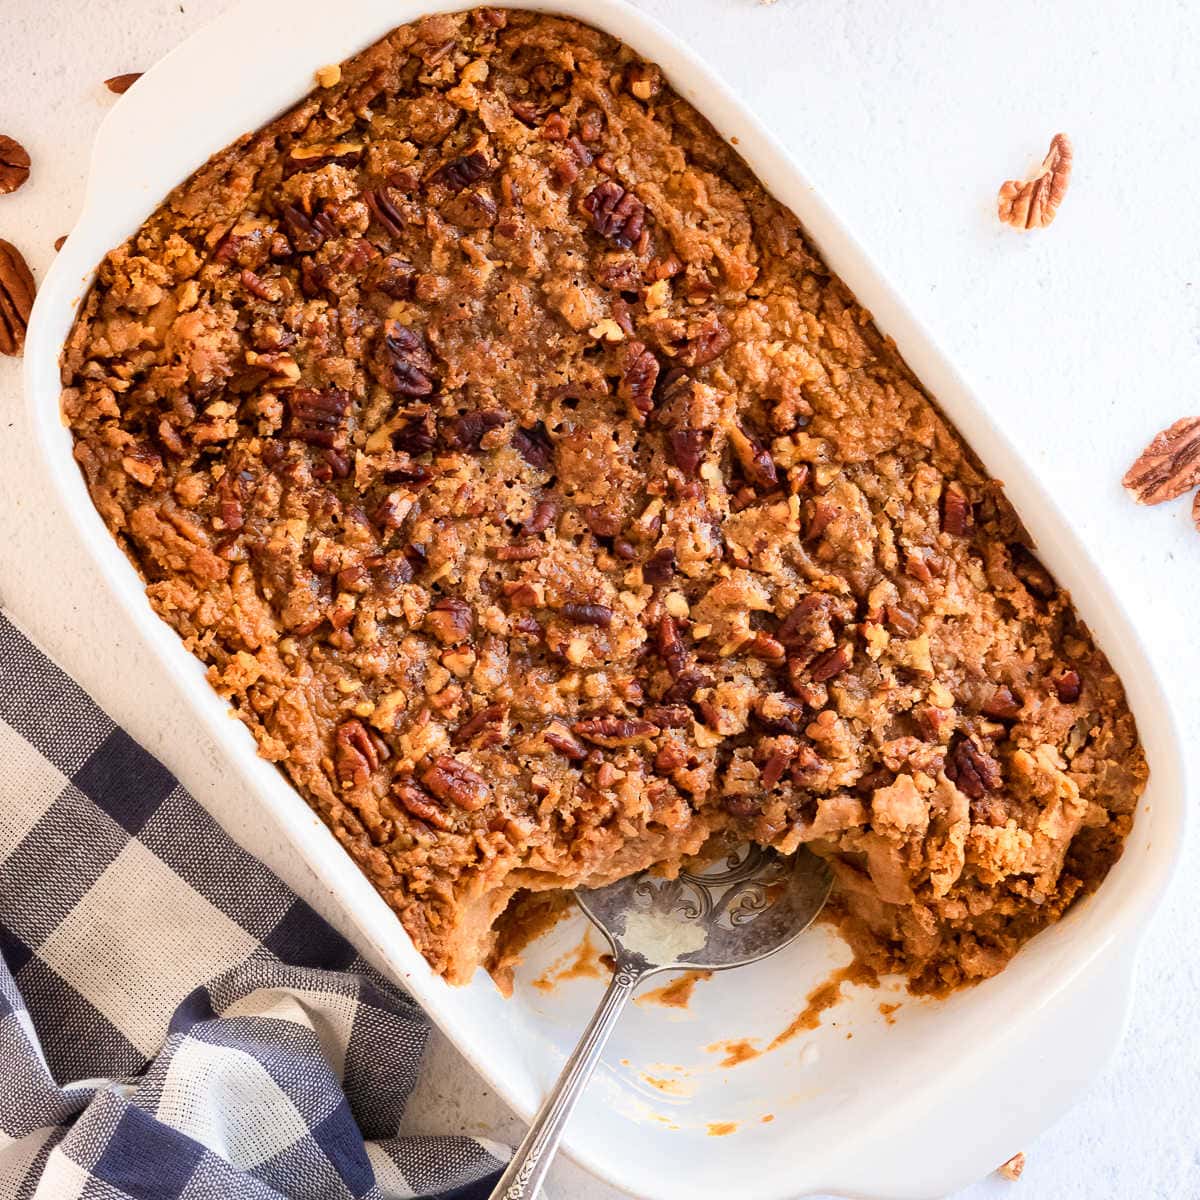 A sweet potato casserole with a serving removed.